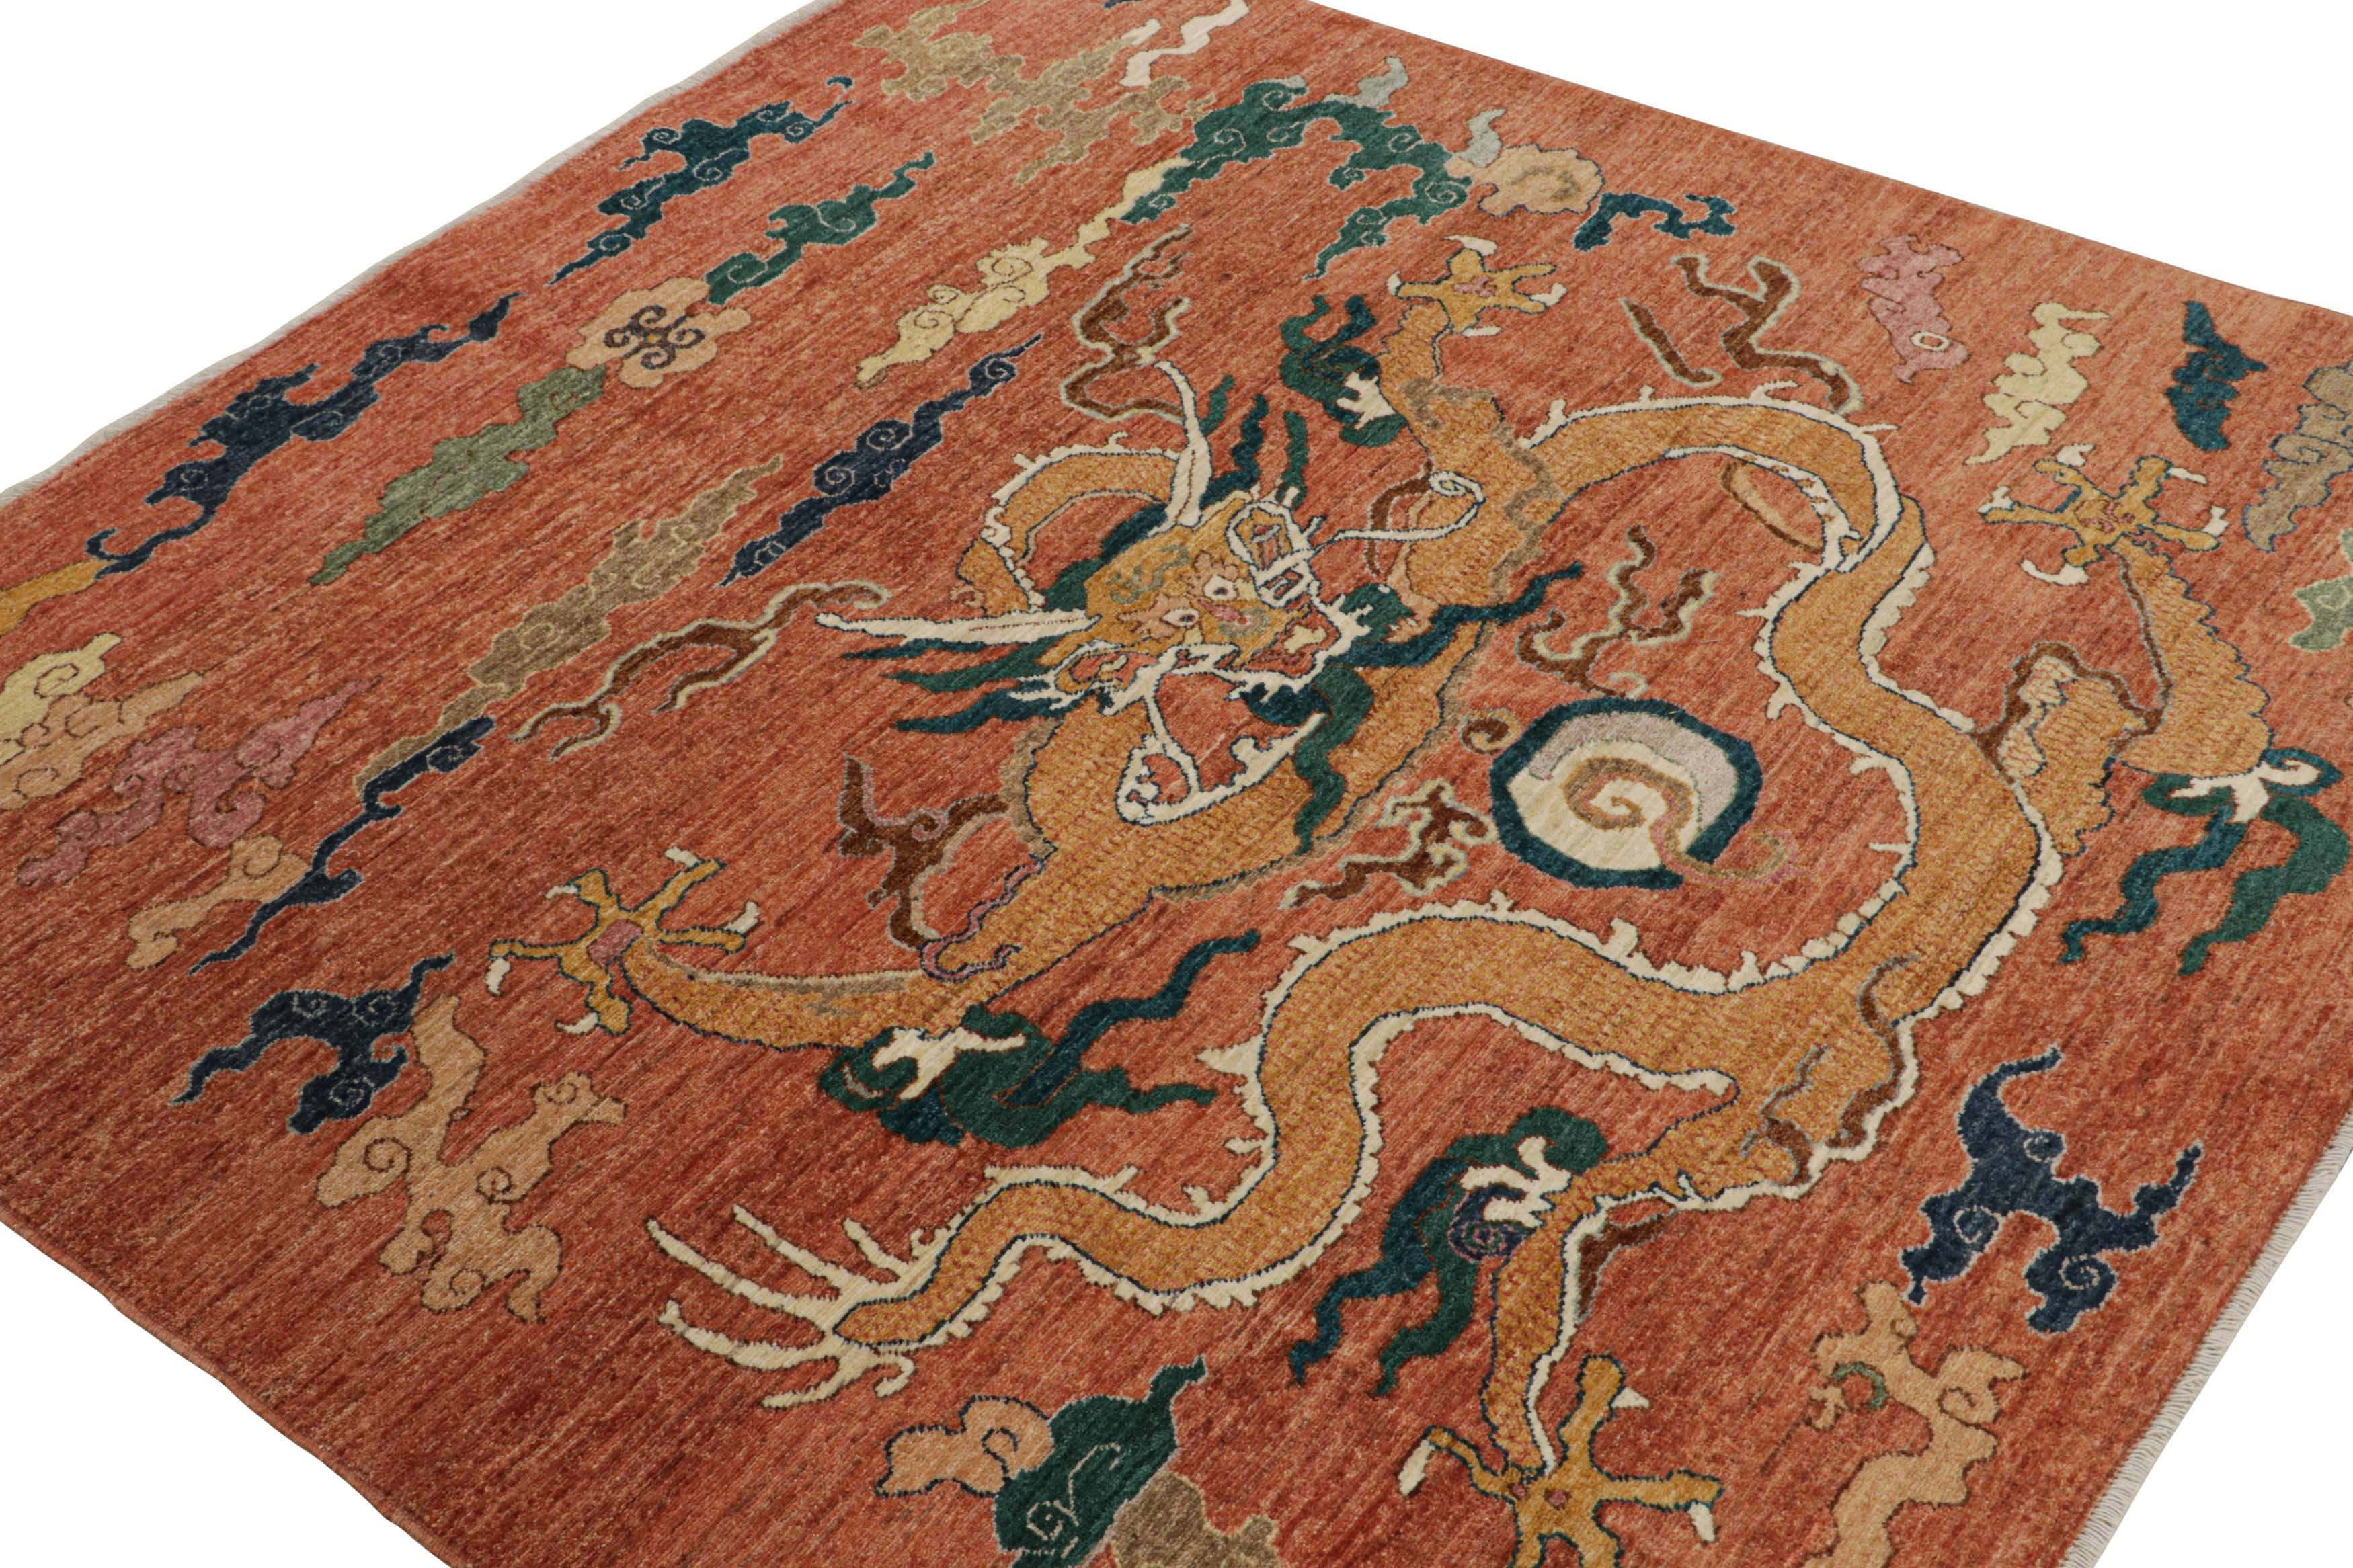 Hand-knotted in wool, this 6x6 square rug, originating from Afghanistan, features a design that has been inspired by antique Chinese Pictorial dragon rugs. 

On the Design: 

Inspired by antique Chinese pictorial rugs—specifically animal rugs with